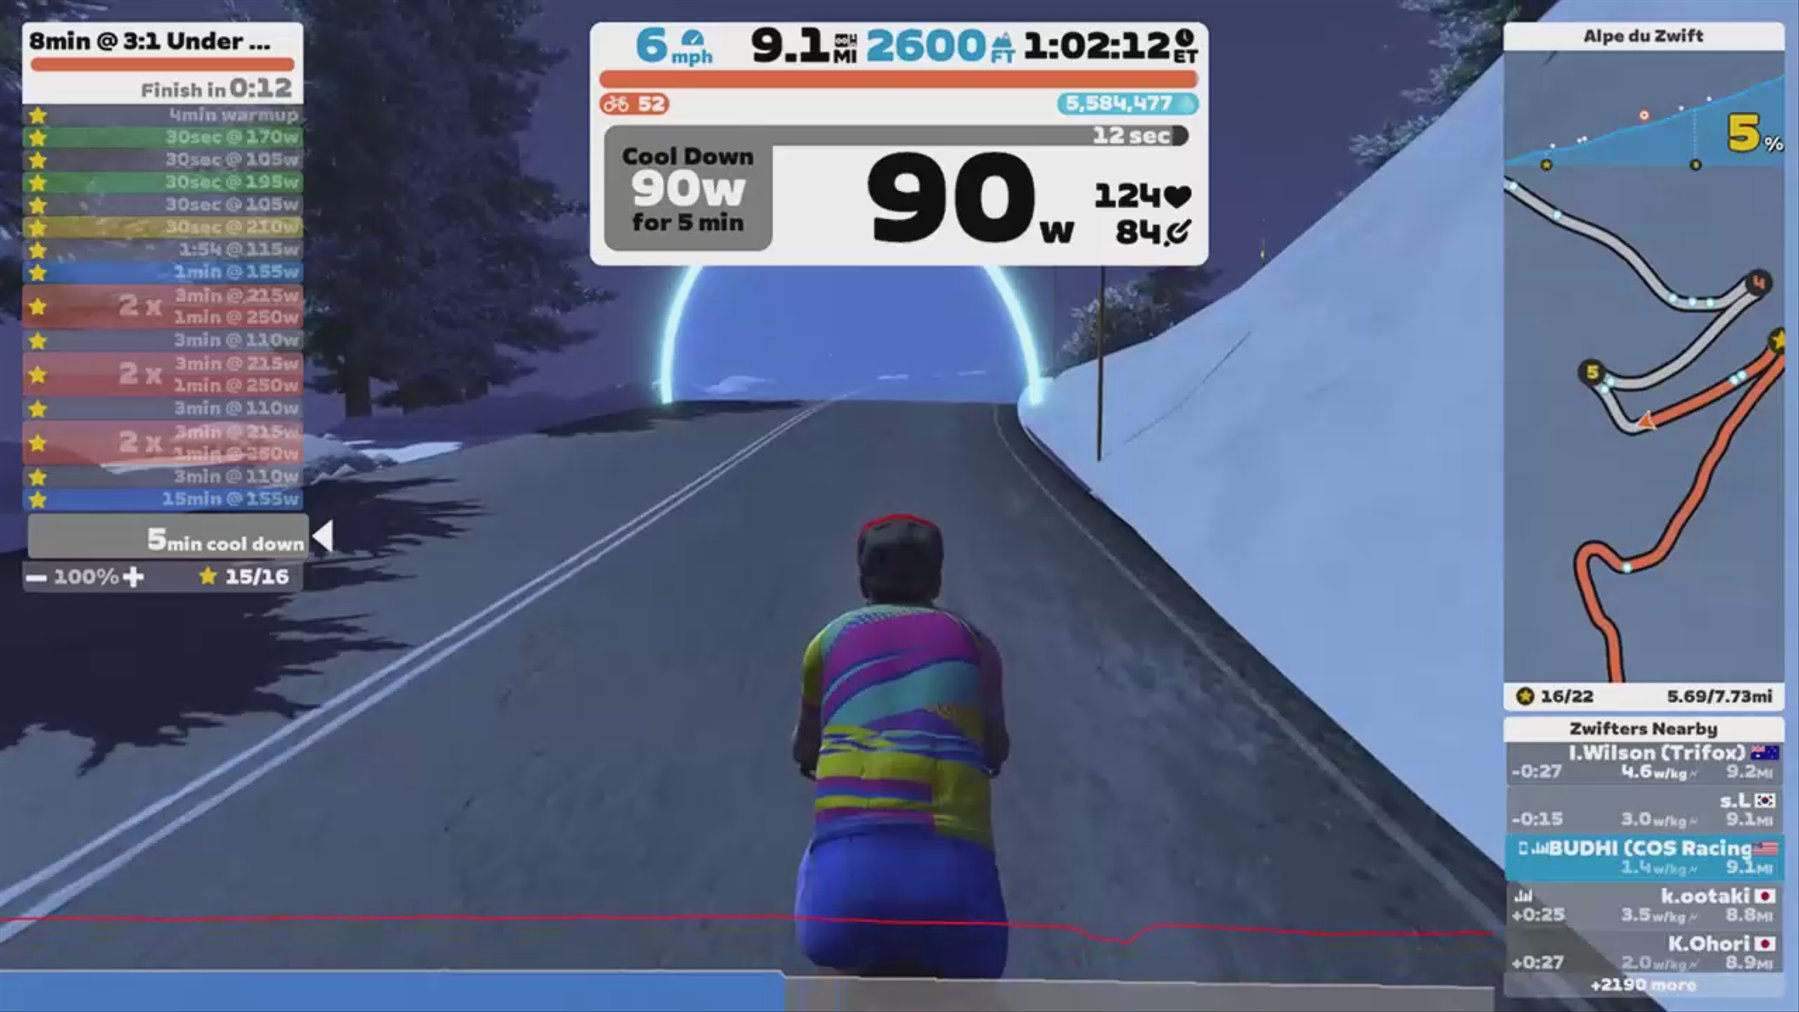 Zwift - 8min @ 3:1 Under Over Intervals on Road to Sky in Watopia